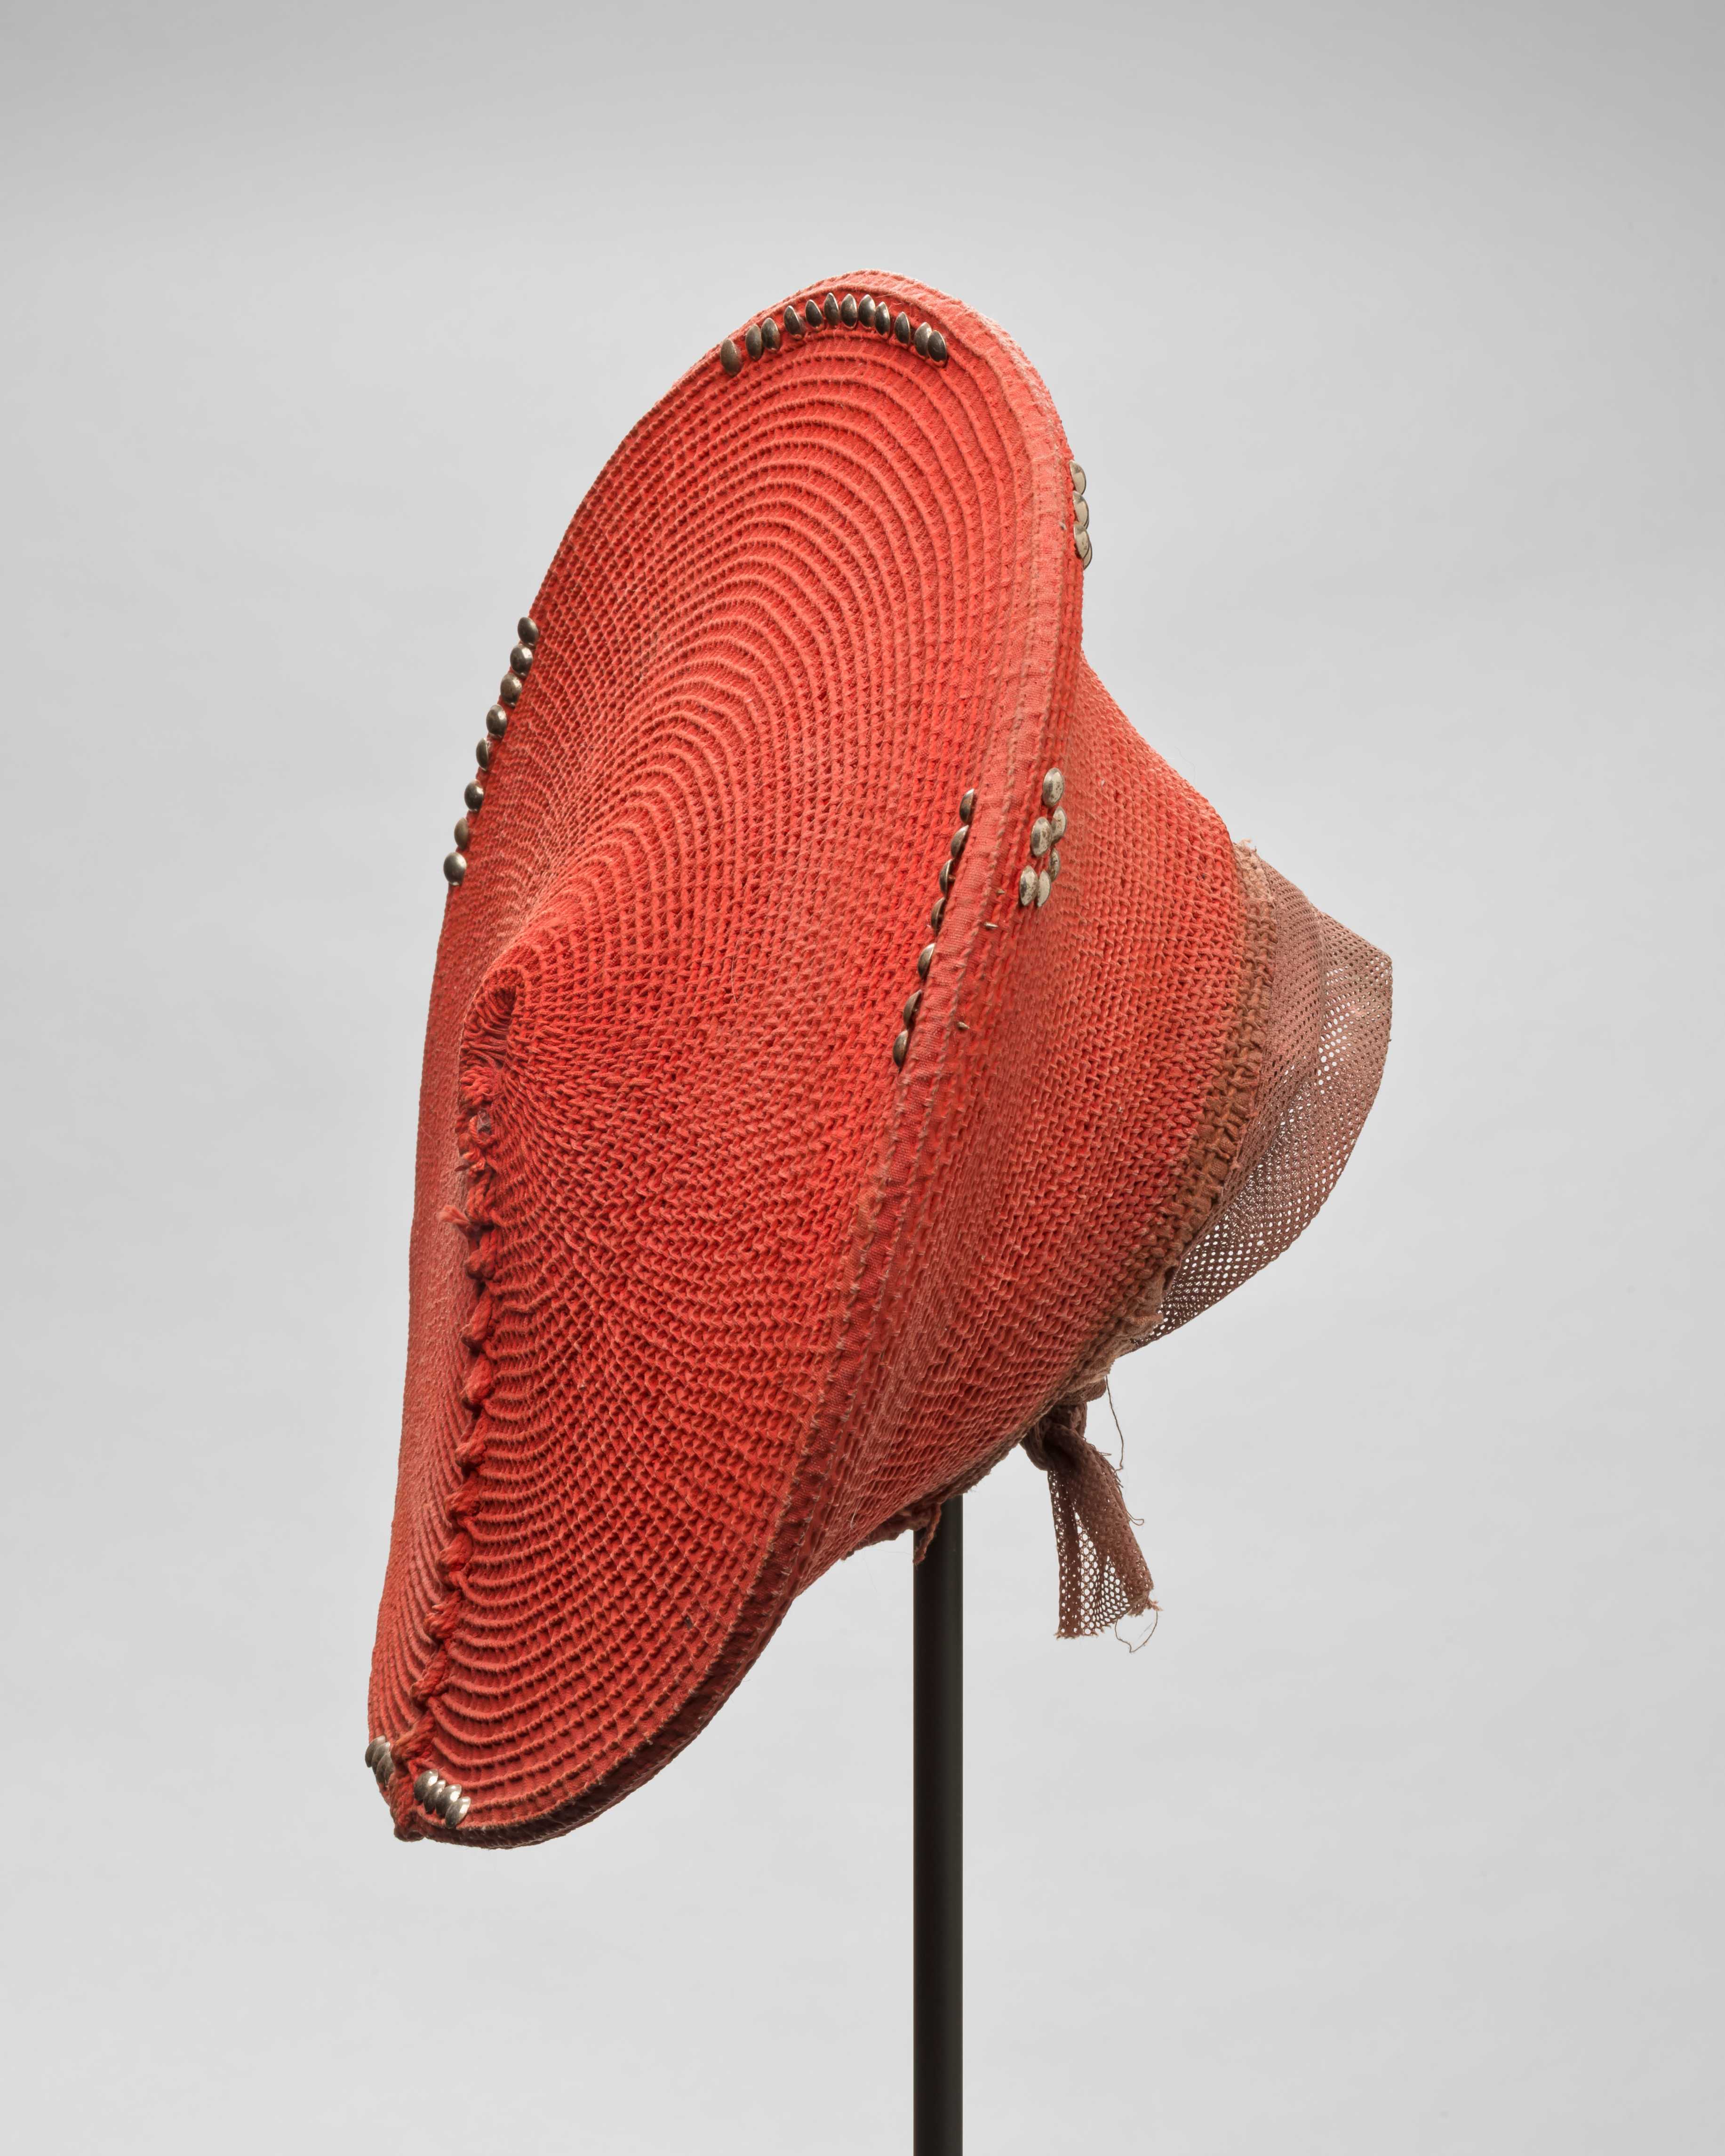 A woven, coral colored hat made of grass fiber, fat, ochre, metal, and pigment.